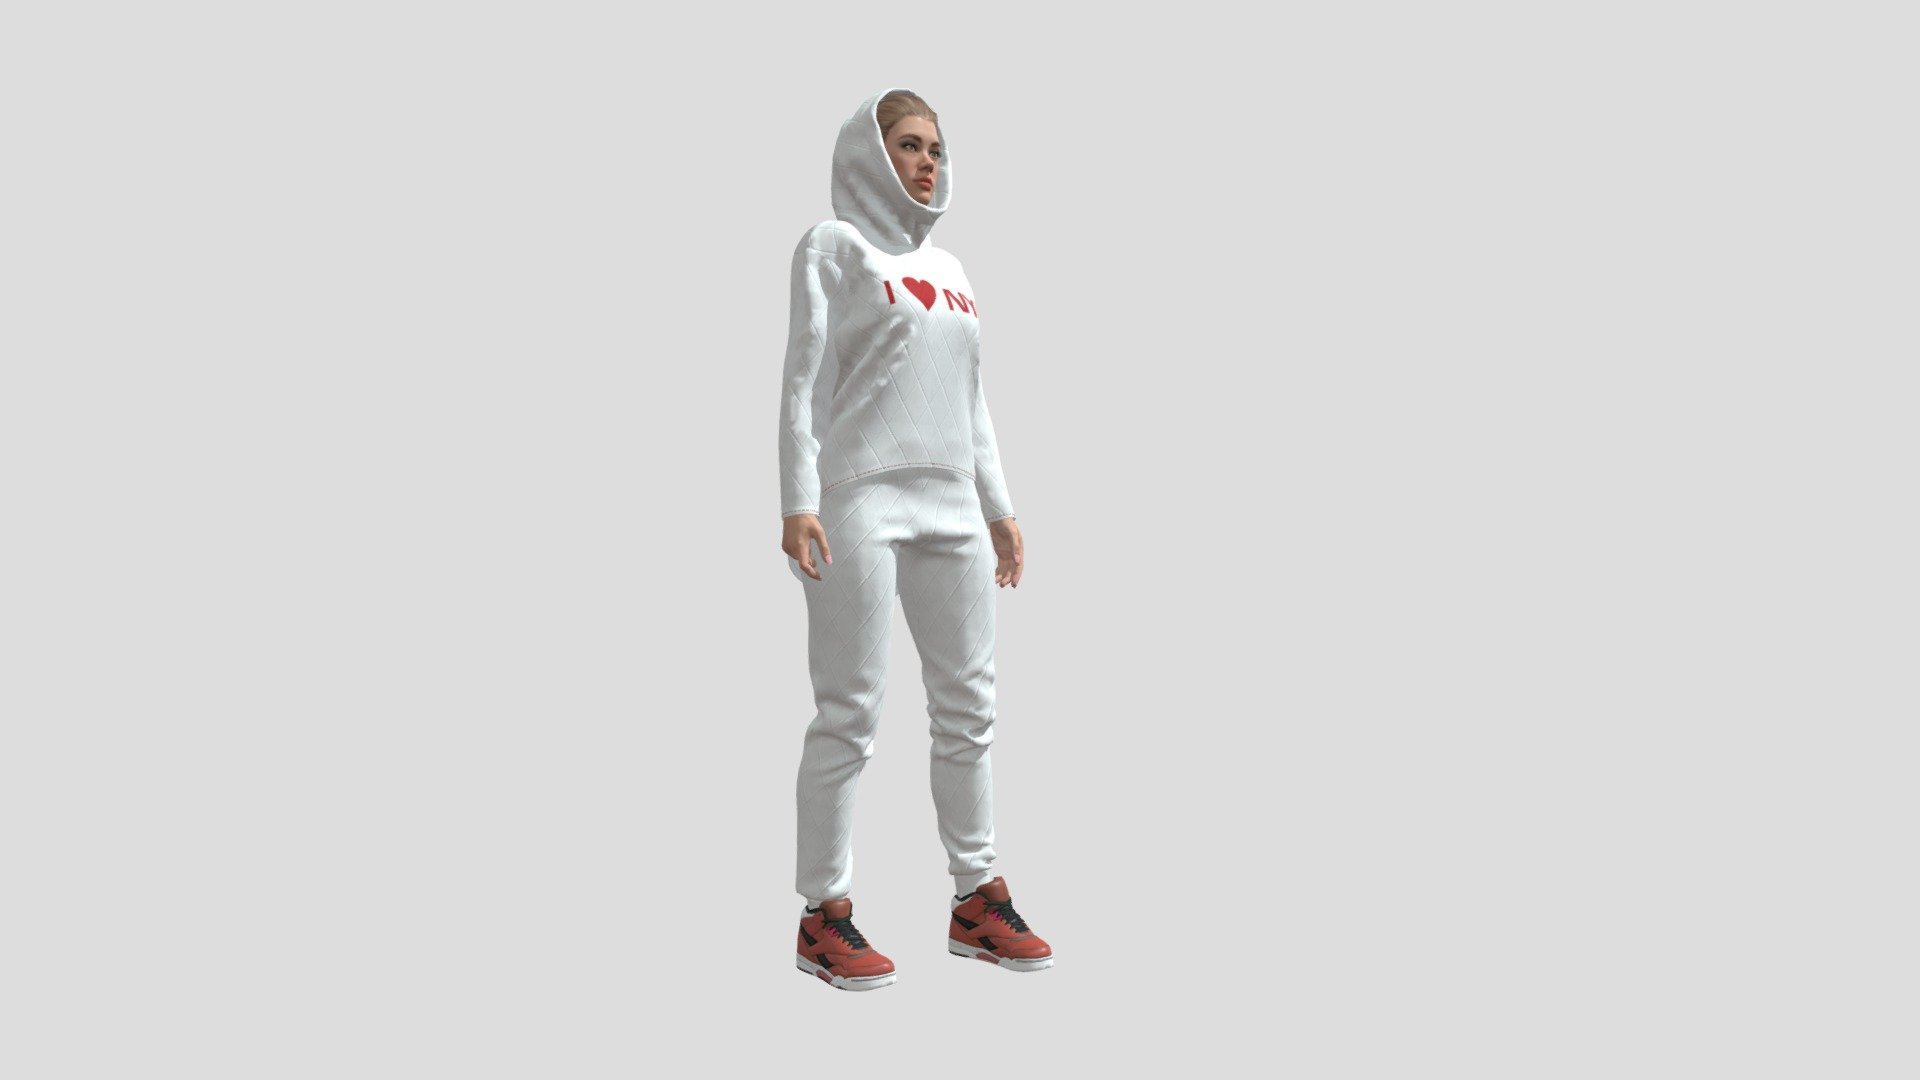 Realistic Female Character Alicia sport outfit edition - white hoodie, sweatpants and sneakers.
High-quality game-ready rigged 3D Female Character. Clothes are separated. You can change hair, shoes and clothes - Realistic Female Character Alicia Sport - Buy Royalty Free 3D model by Rachelle Ete (@RachelleEte) 3d model